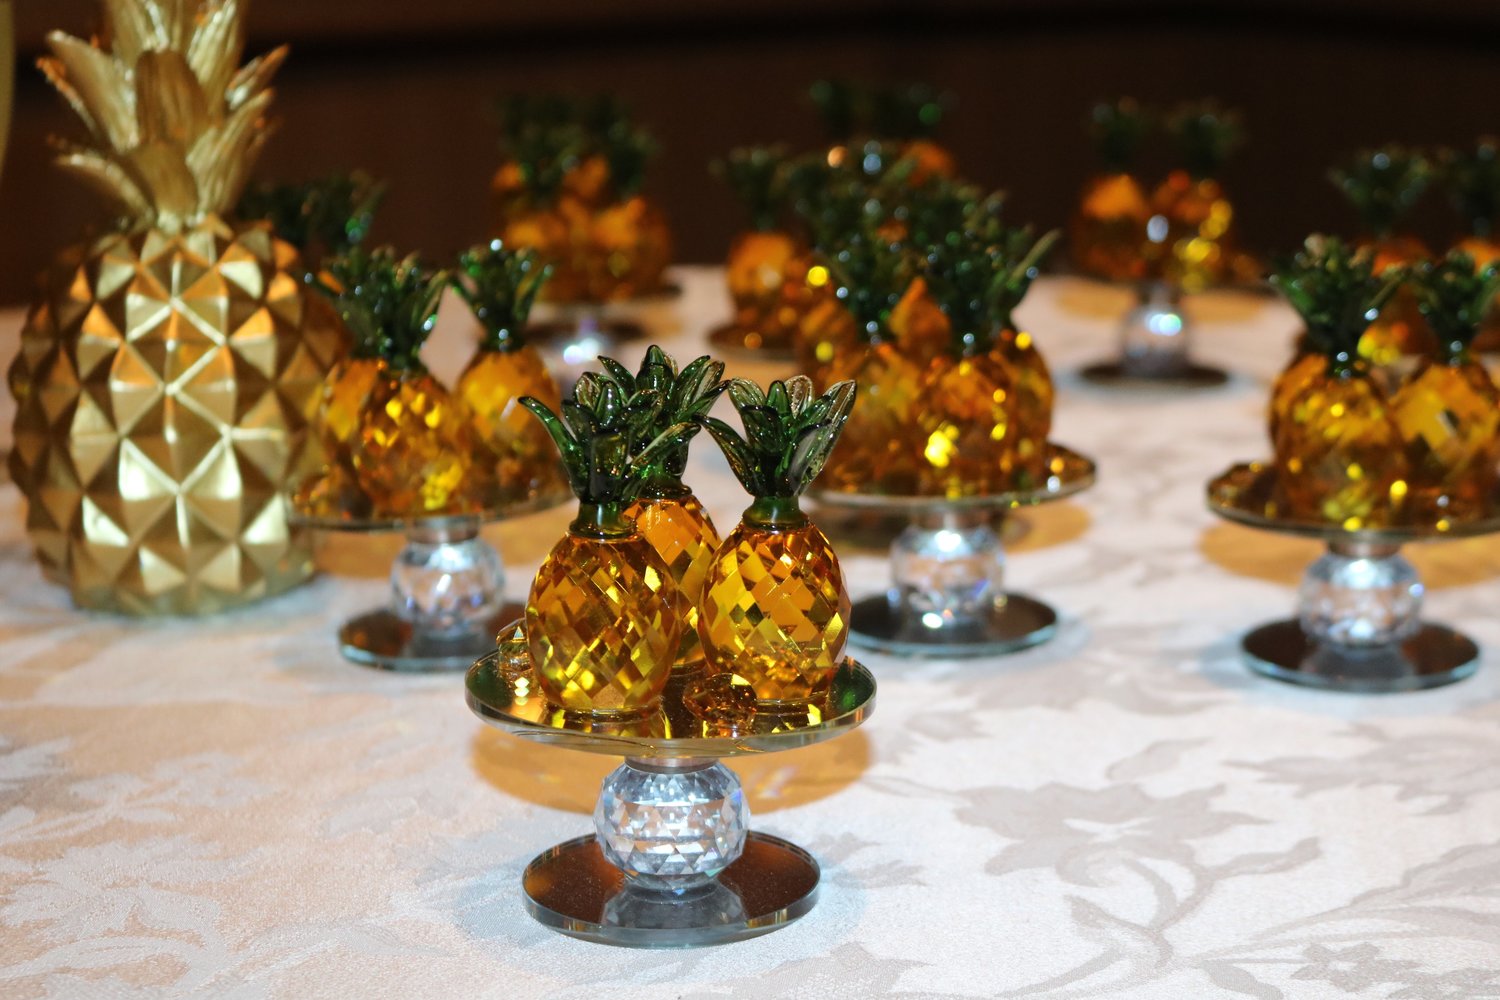 Awards handed out were crystal golden pineapples.